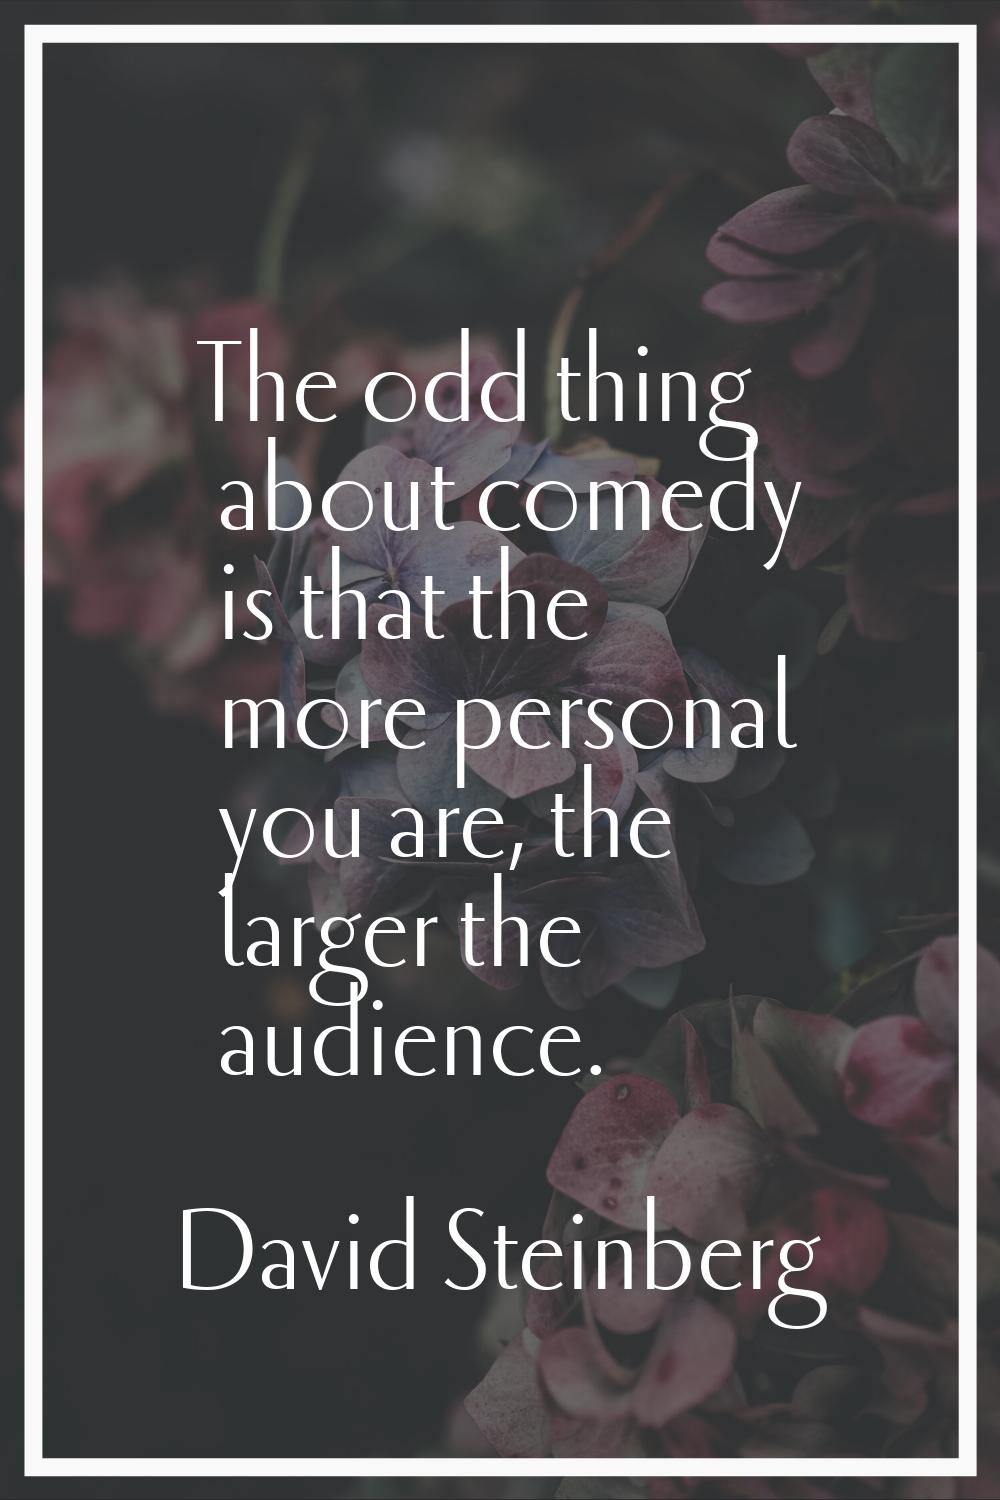 The odd thing about comedy is that the more personal you are, the larger the audience.